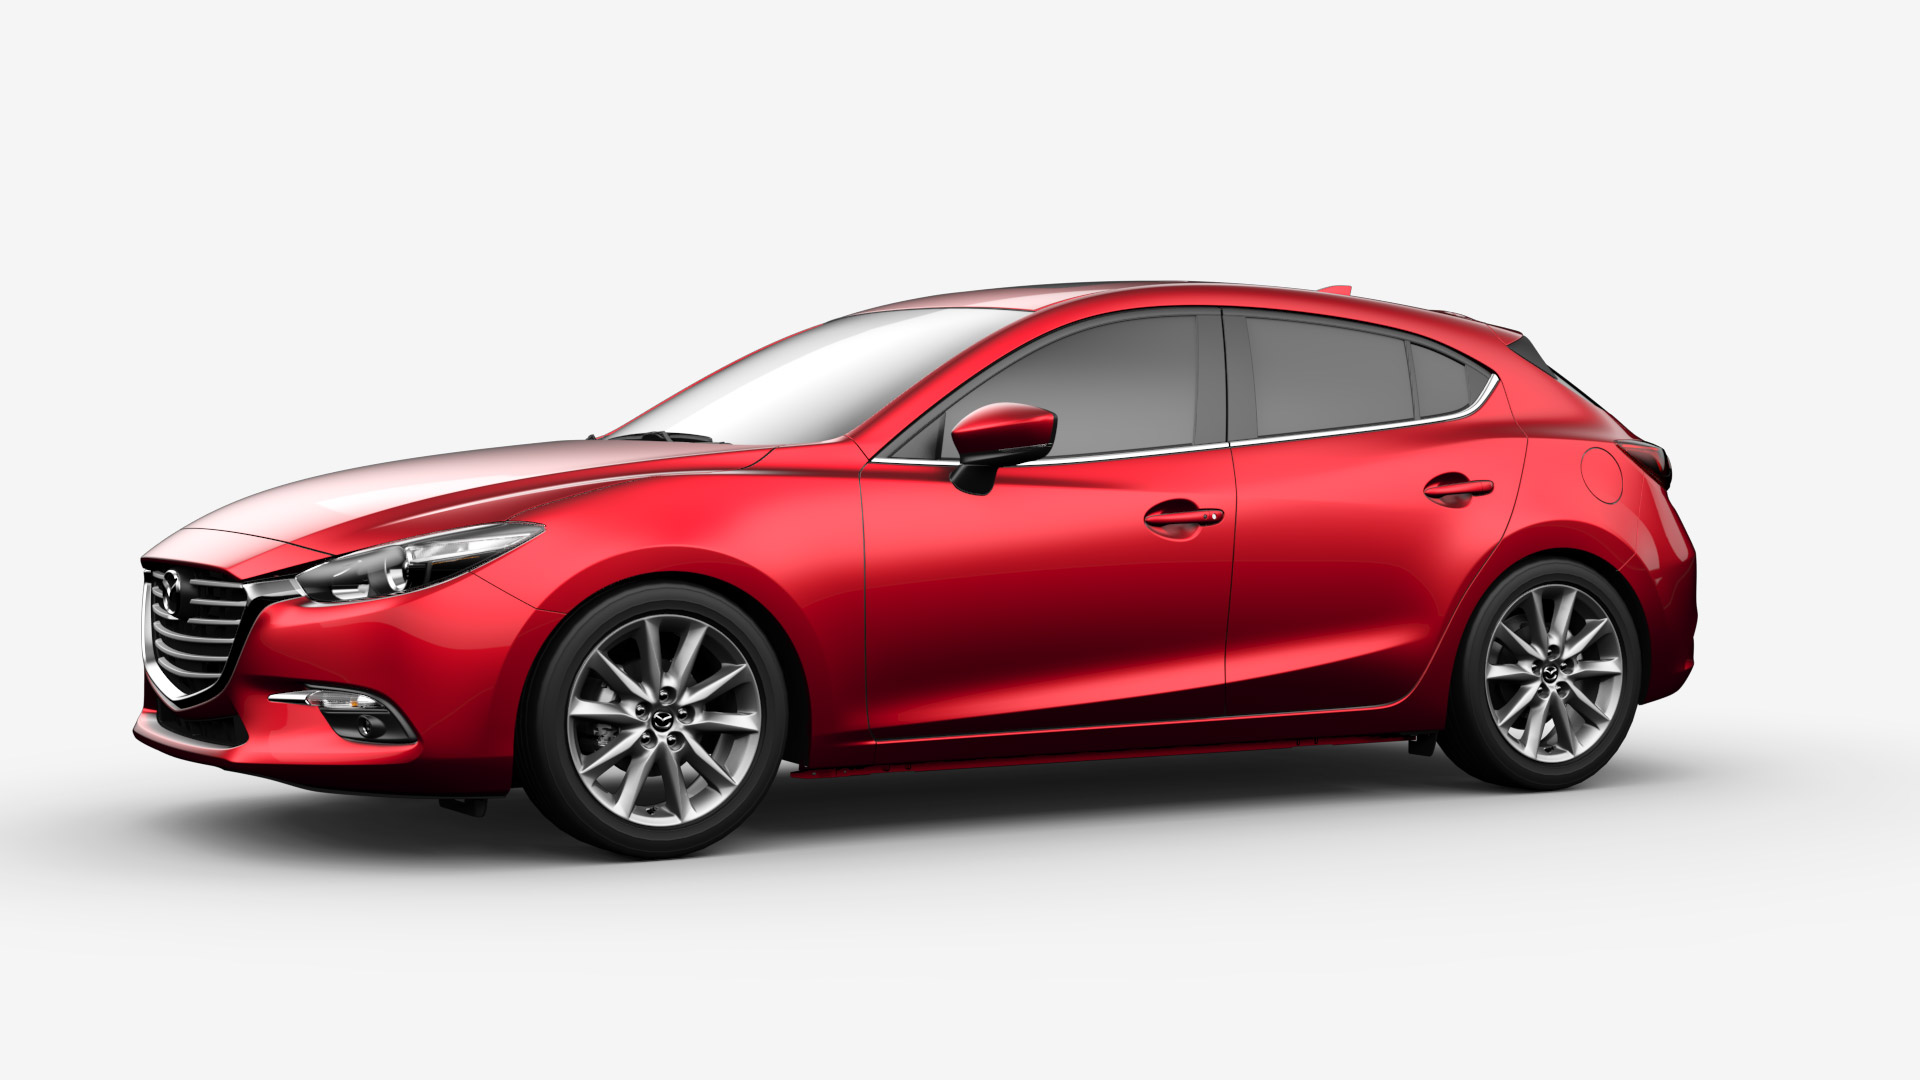 Mazda 3 Backgrounds, Compatible - PC, Mobile, Gadgets| 1920x1080 px